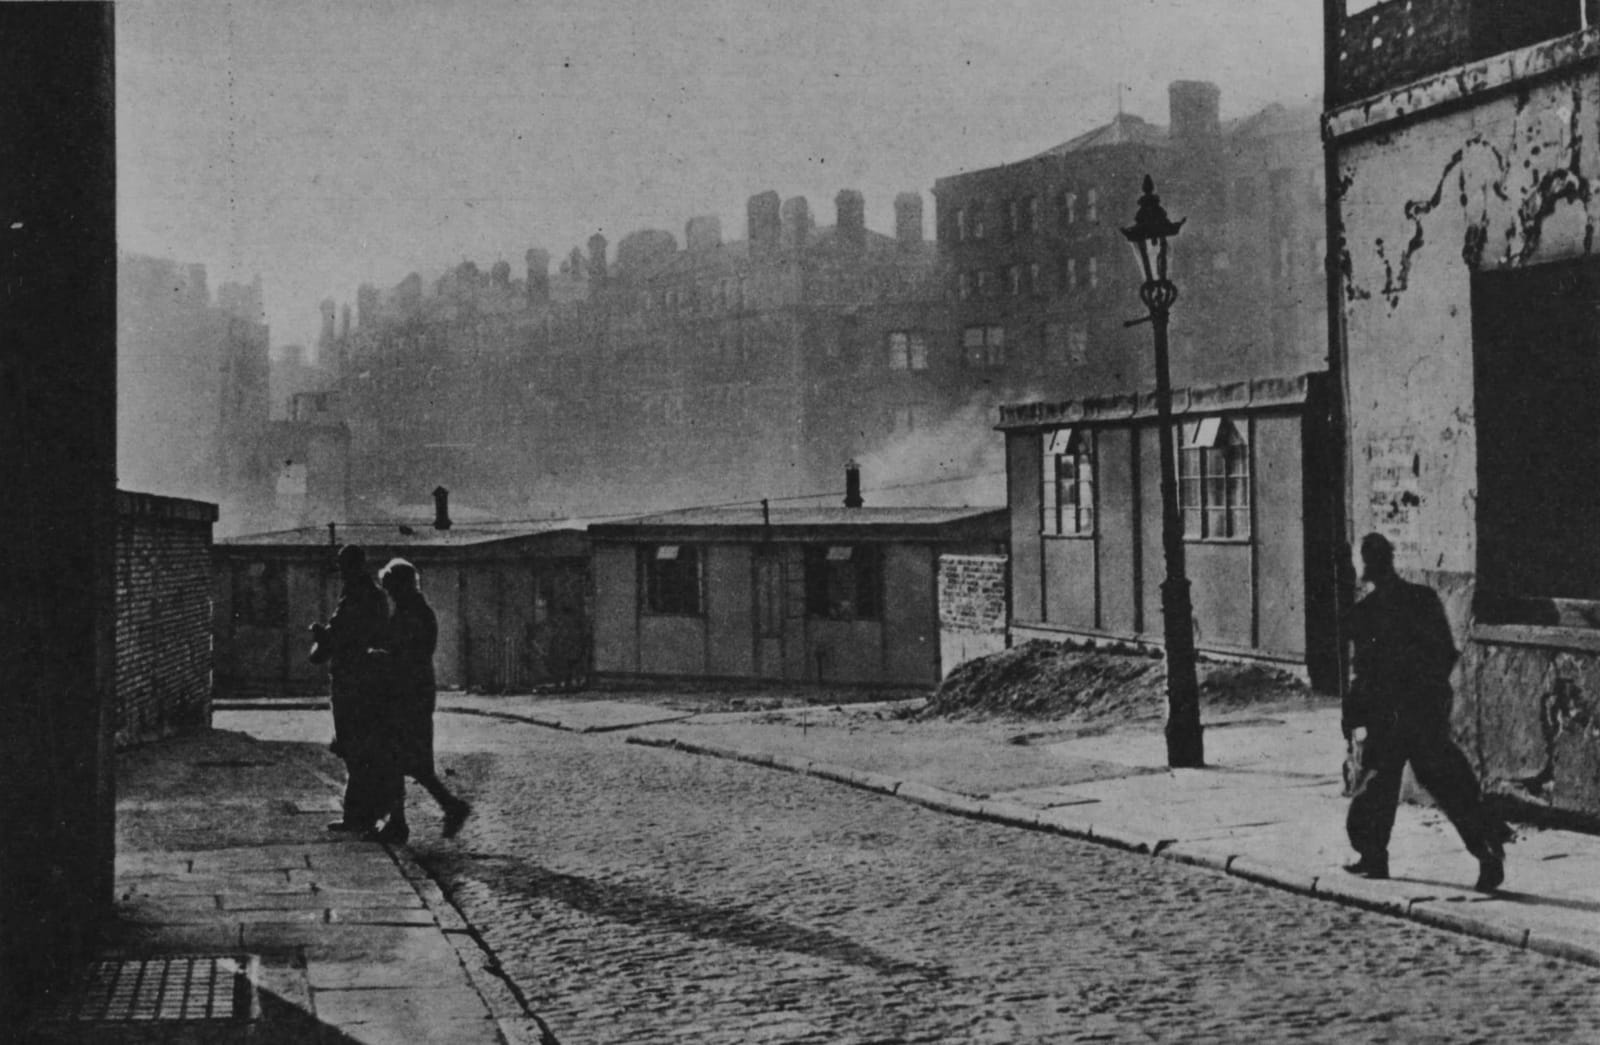 A desolate cobbled street with small bungalow homes sitting in front of larger buildings standing in the distance.